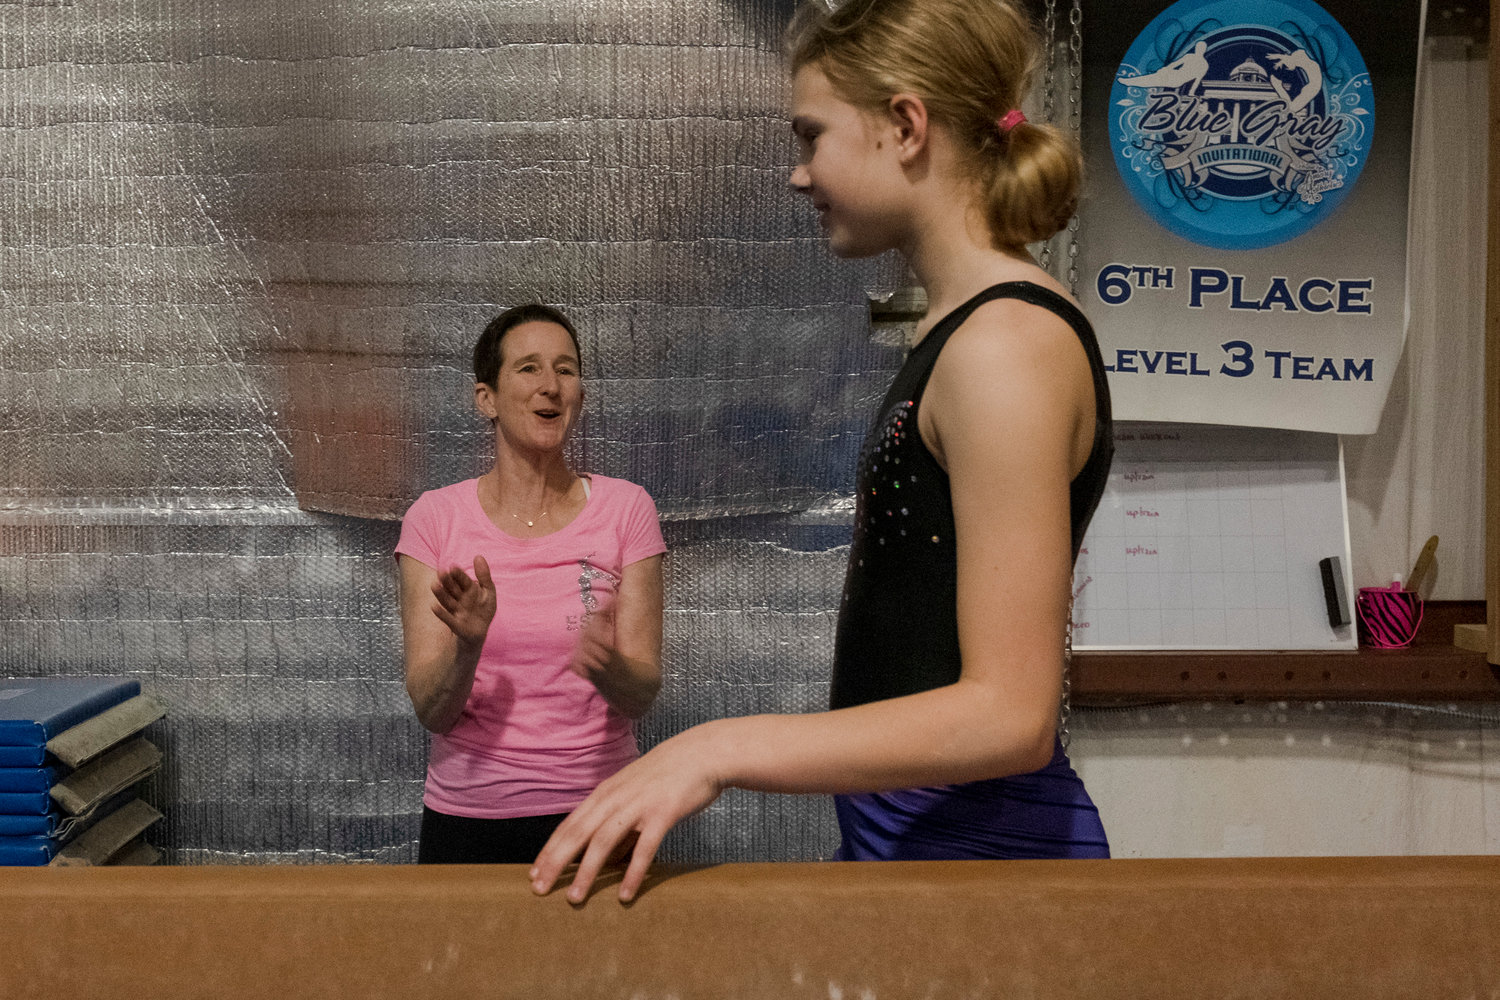 Suzanne Hinkley uses her 30 years of coaching and 14 years of competition judging experience to help her gymnasts refine their skills before the State Championship this weekend in Foley.